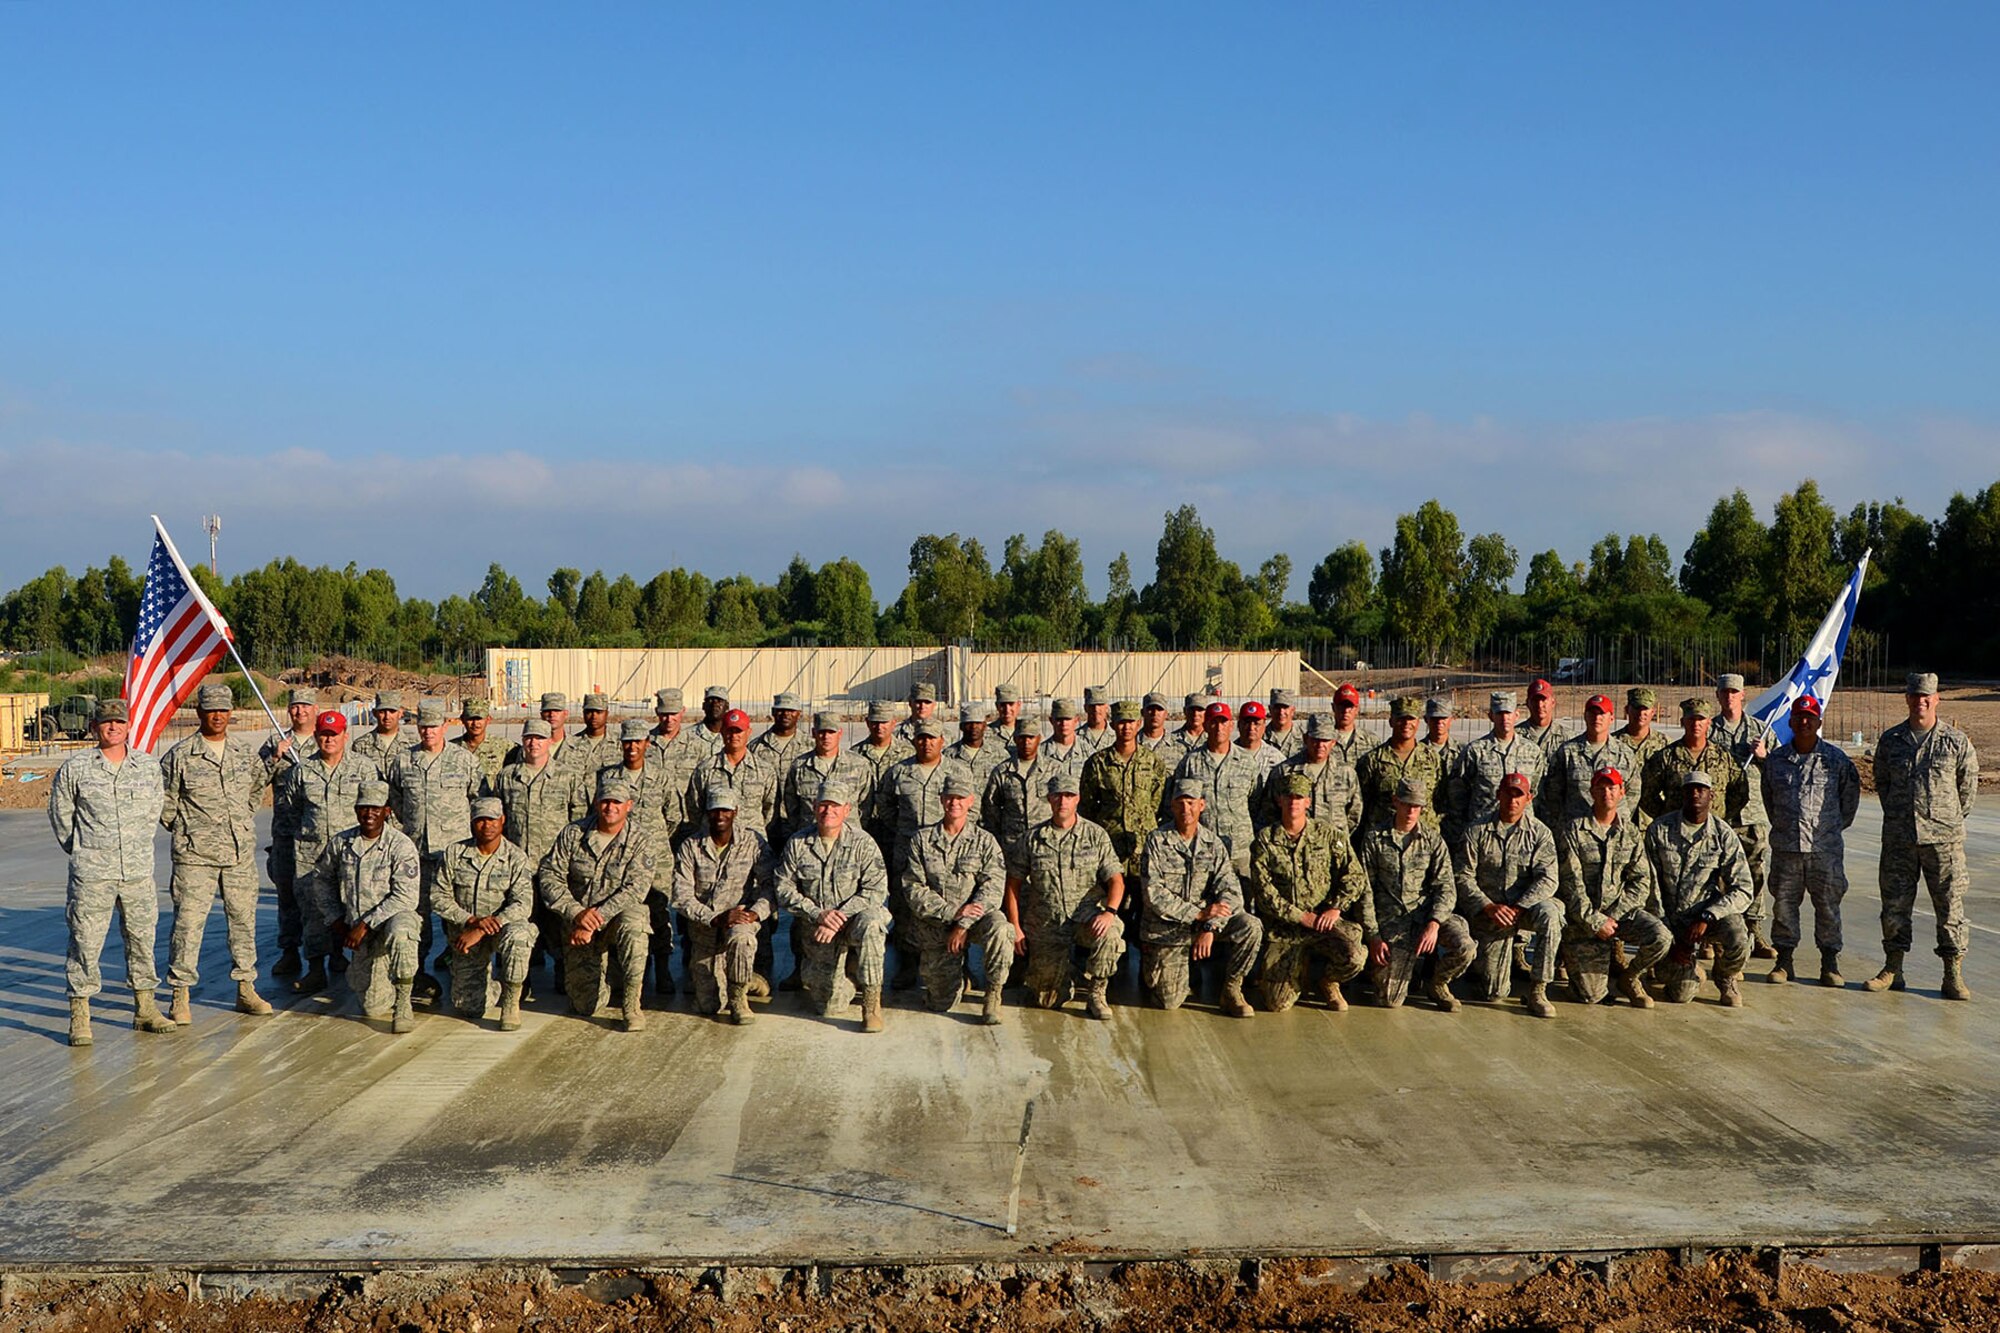 U.S. Air Force civil engineers from the South Carolina Air National Guard’s 169th Civil Engineer Squadron Prime BEEF, Ohio Air National Guard’s 200th RED HORSE Squadron and U.S. Navy SEABEES from the Naval Mobile Construction Battalion 11, pose for a photo during construction of mutli-purpose buildings in Israel, July 9, 2015. Prime BEEF Airmen are working alongside 200th RED HORSE Squadron and U.S. Navy SEABEES civil engineers during the deployment for training exercise. The construction project is to help S.C. Prime BEEF Airmen maintain their civil engineering specialties. (South Carolina Air National Guard photo by Tech. Sgt. Caycee R. Watson / RELEASED)